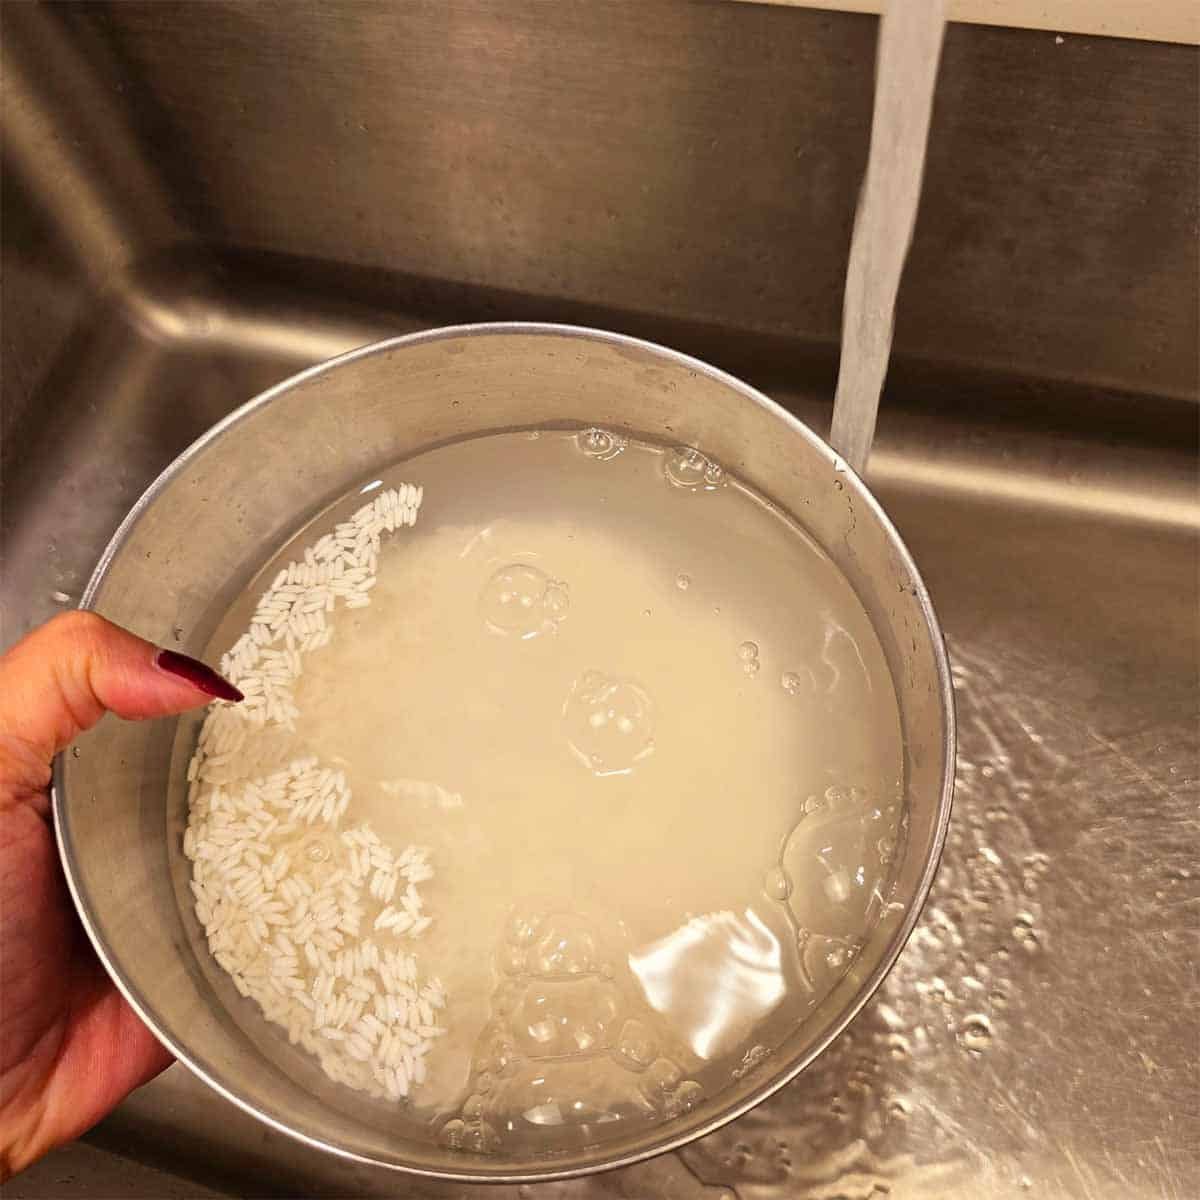 Cleaning sweet rice in a bowl of water preping to roast